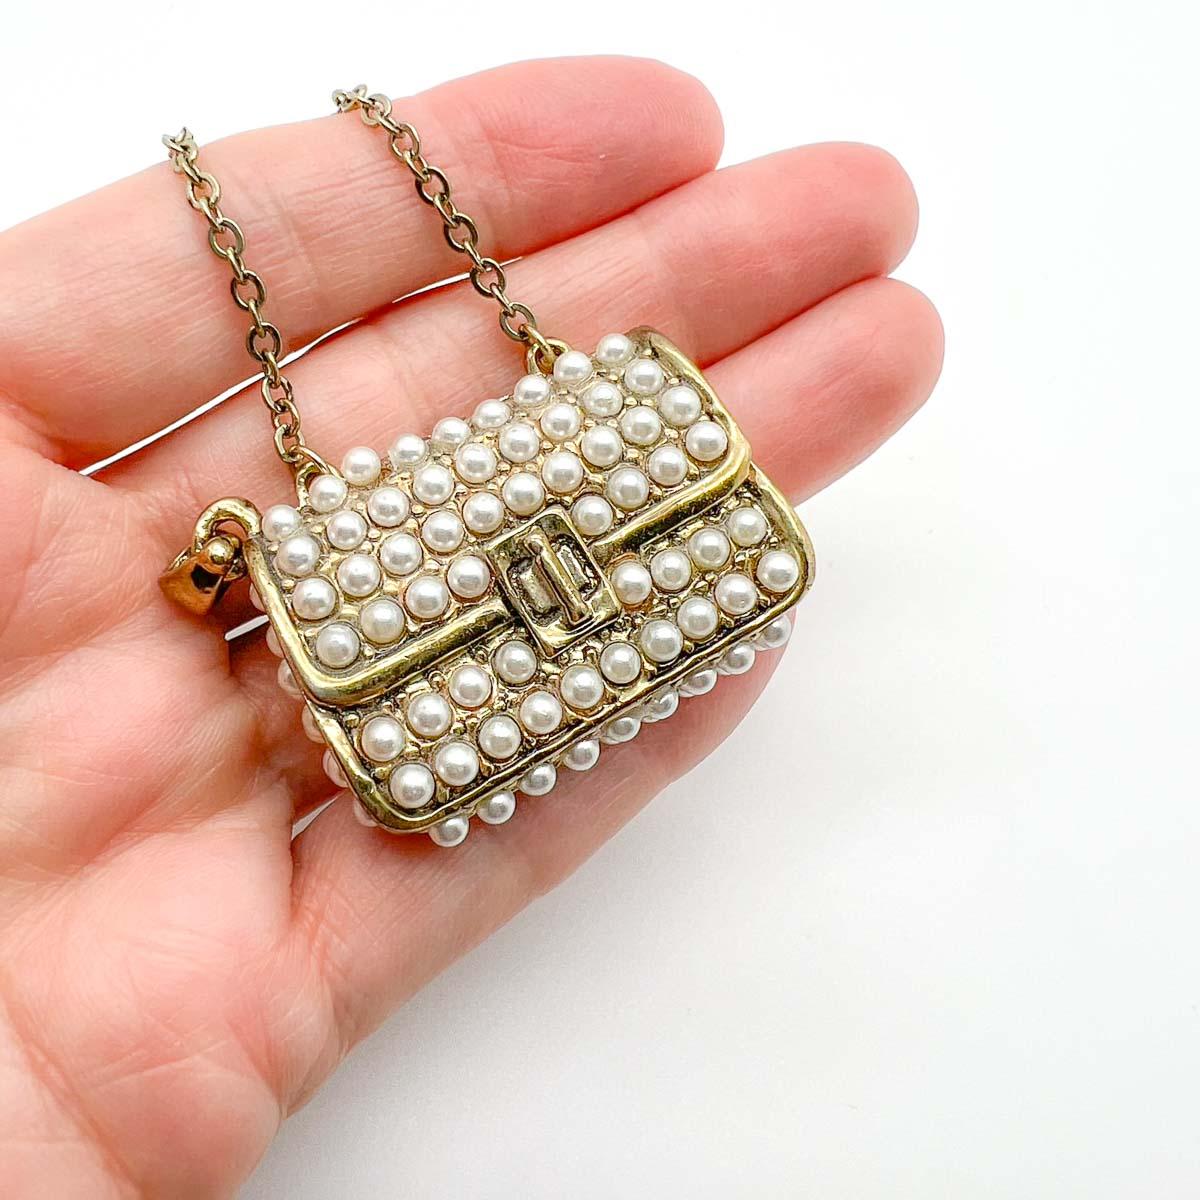 An adorable pearl encrusted handbag pendant to add to your favourite chains for a touch of style. Lustrous faux half pearls adorn the bag front and sides. A wonderfully chic charm.

Vintage Condition: Very good without damage or noteworthy